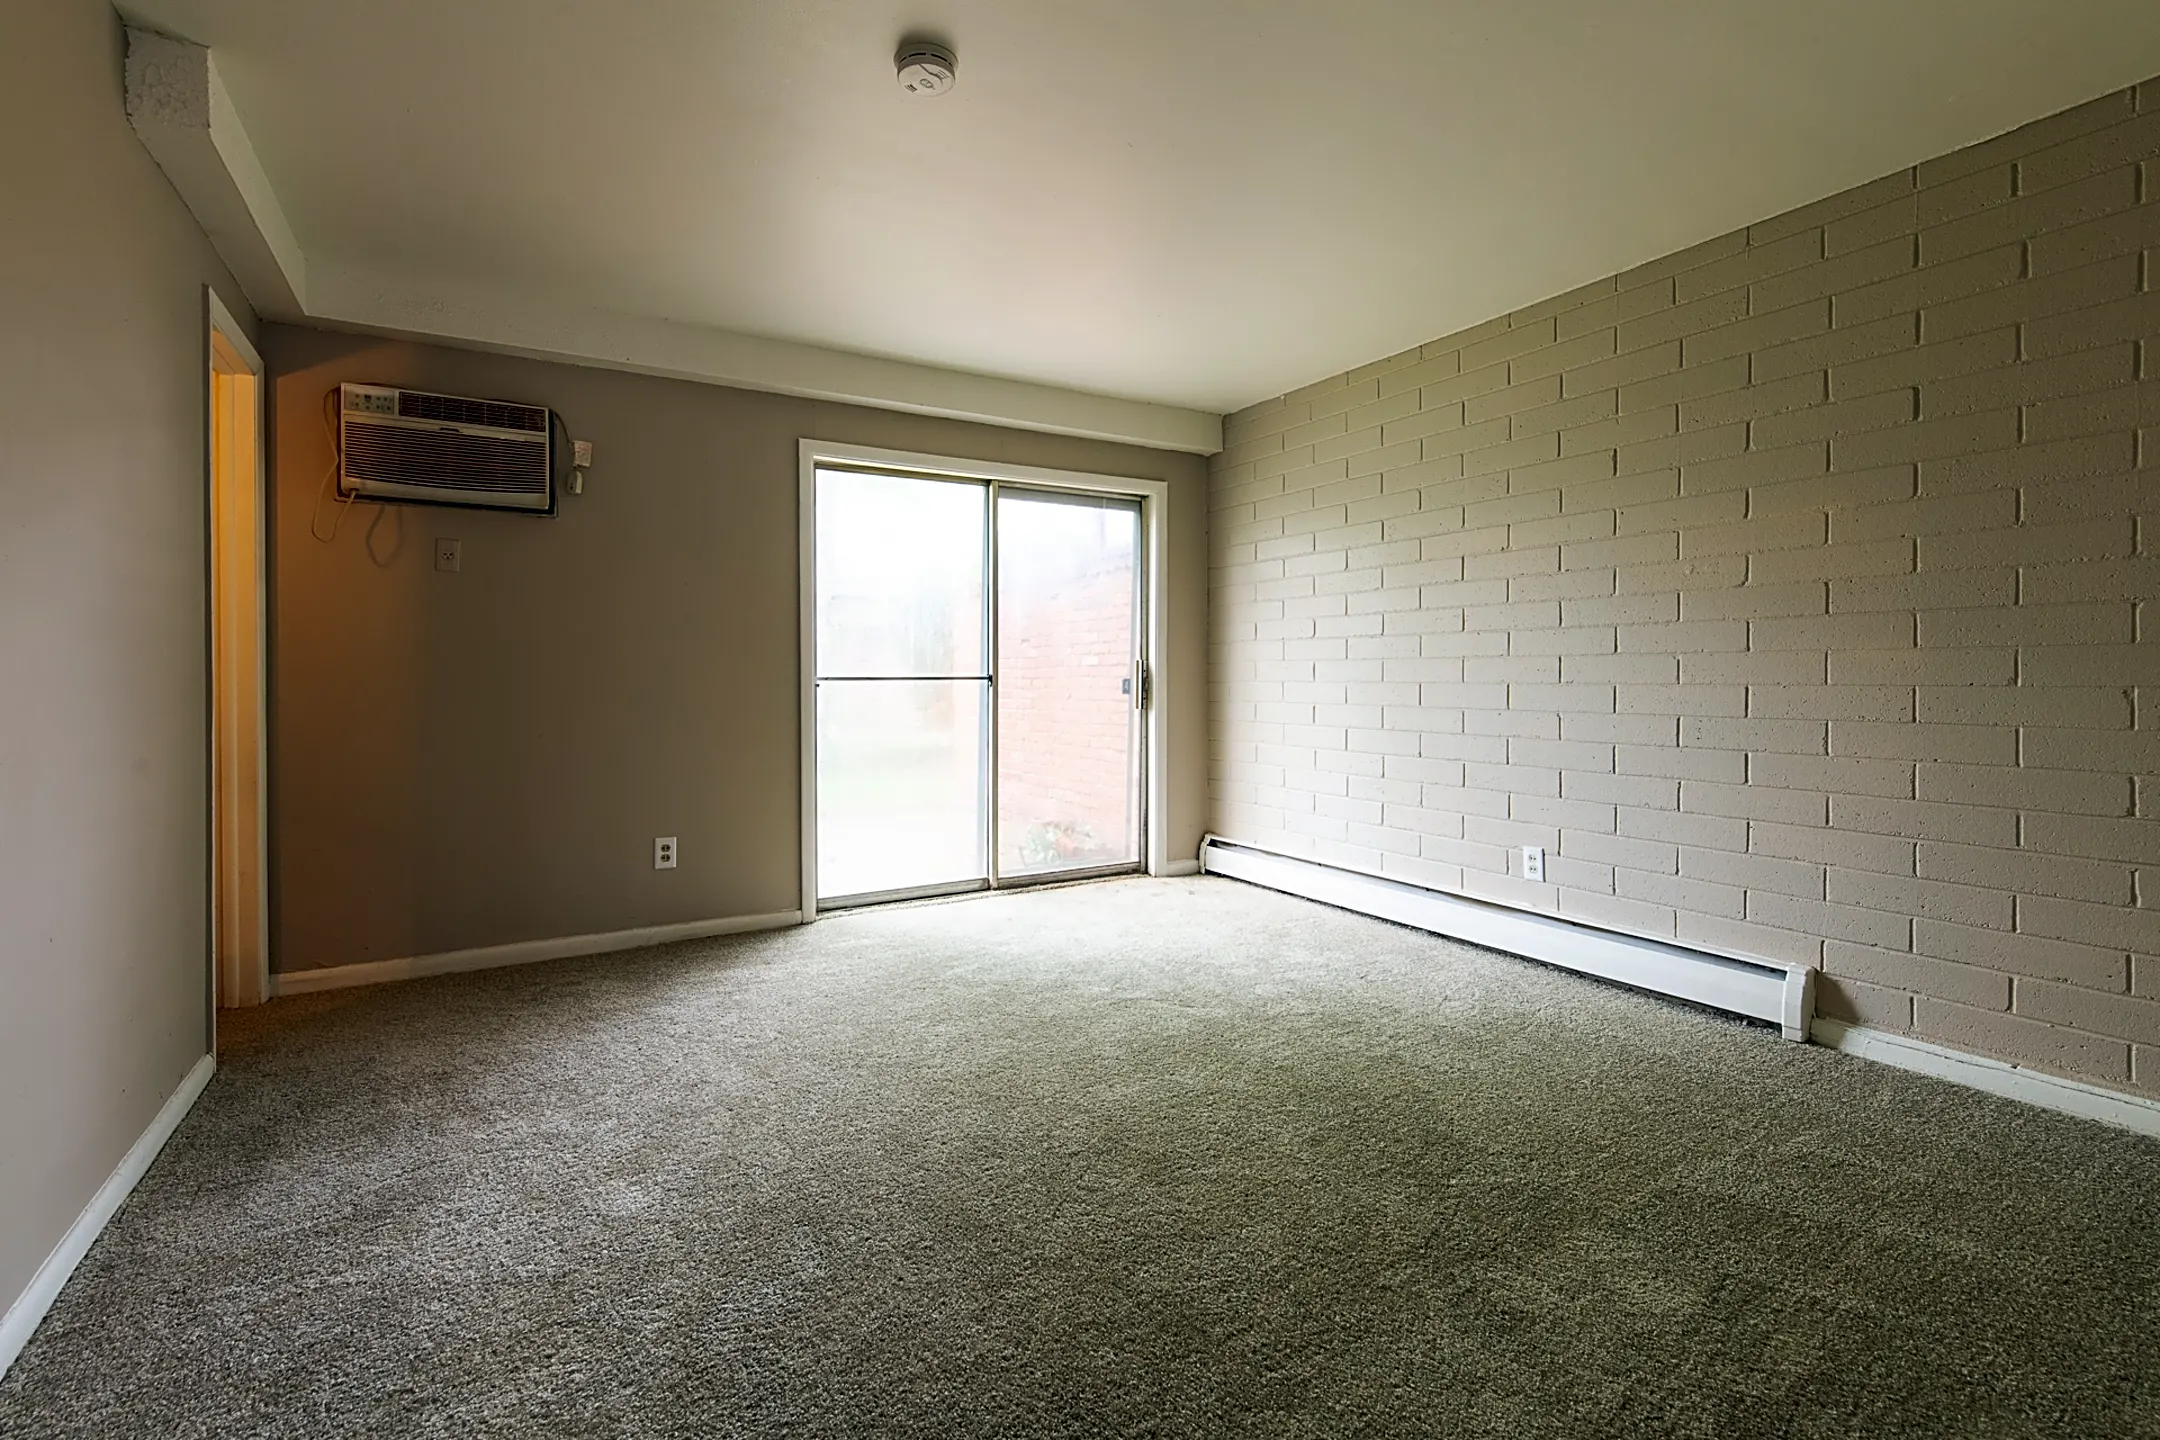 Living Room - InTempus Property Management - Indianapolis, IN